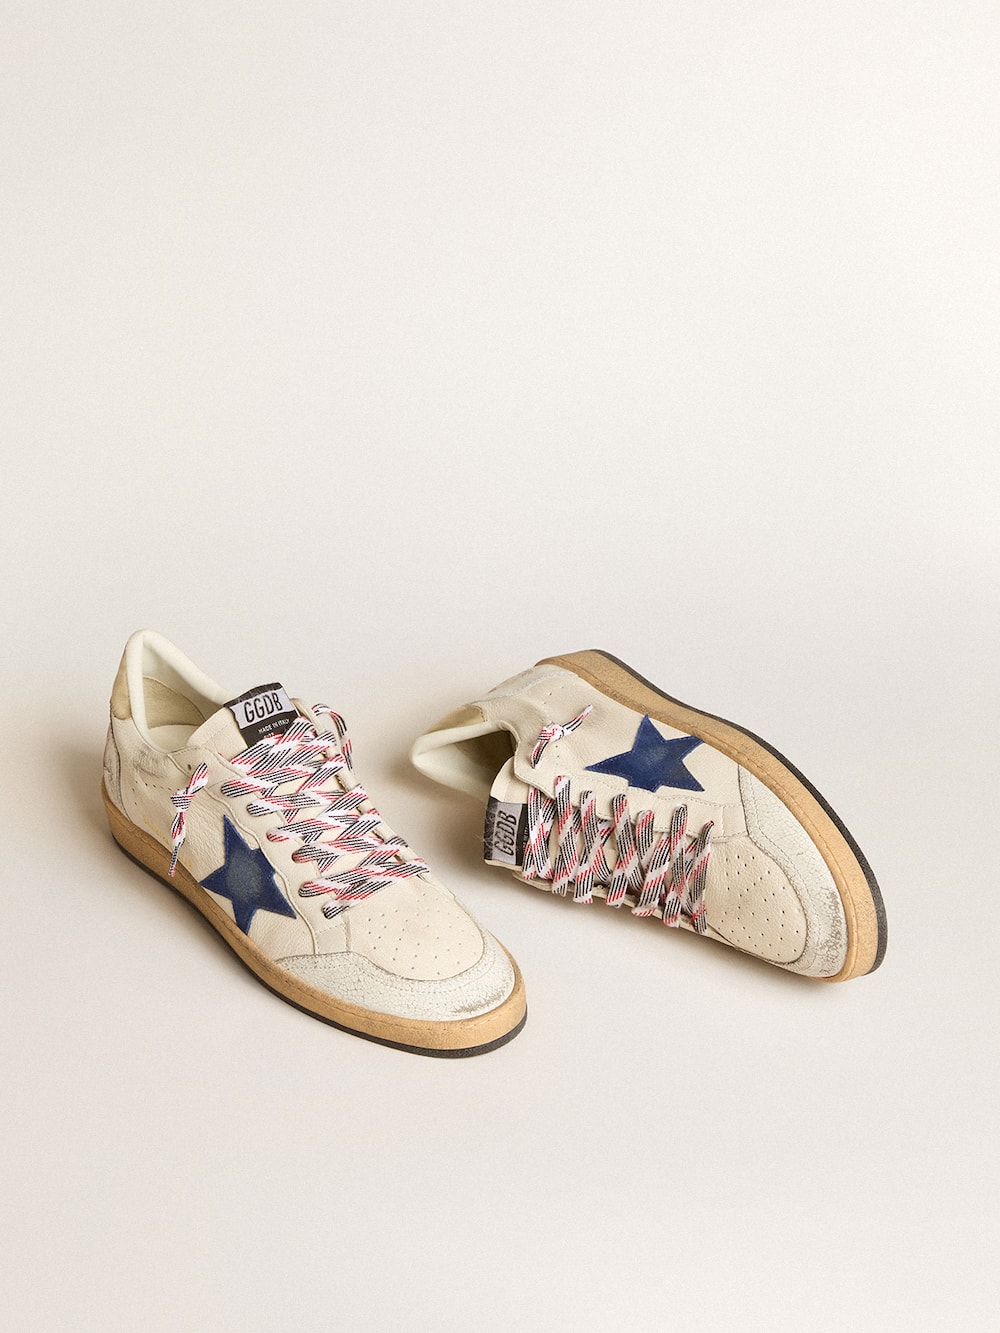 Golden Goose - Men's Ball Star in nappa leather with blue suede star and platinum leather heel tab in 